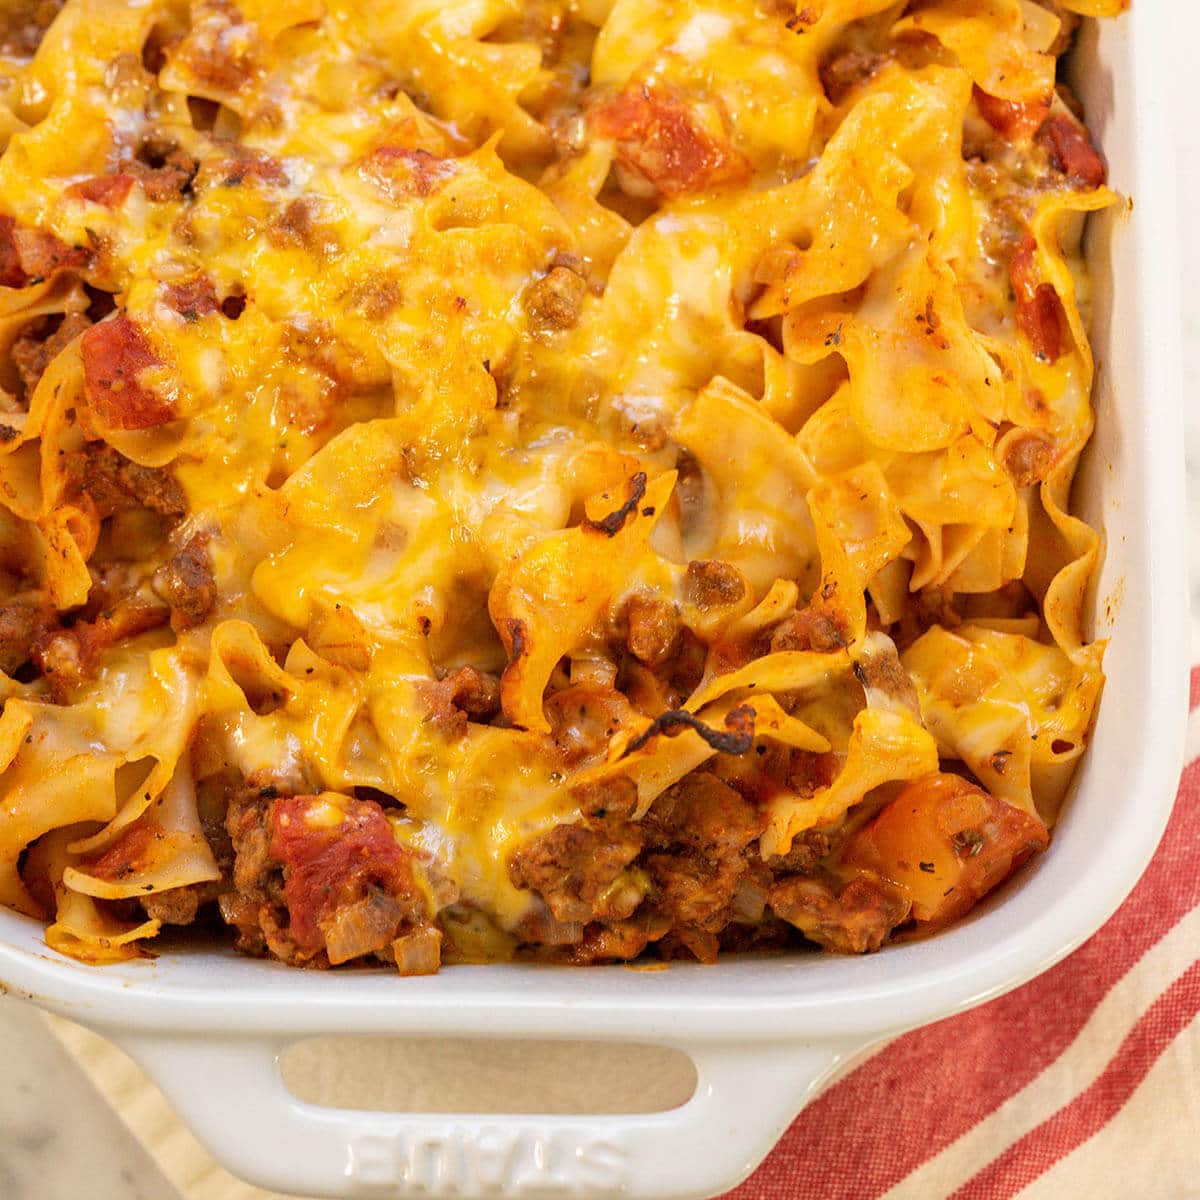 Beef and Noodle Casserole